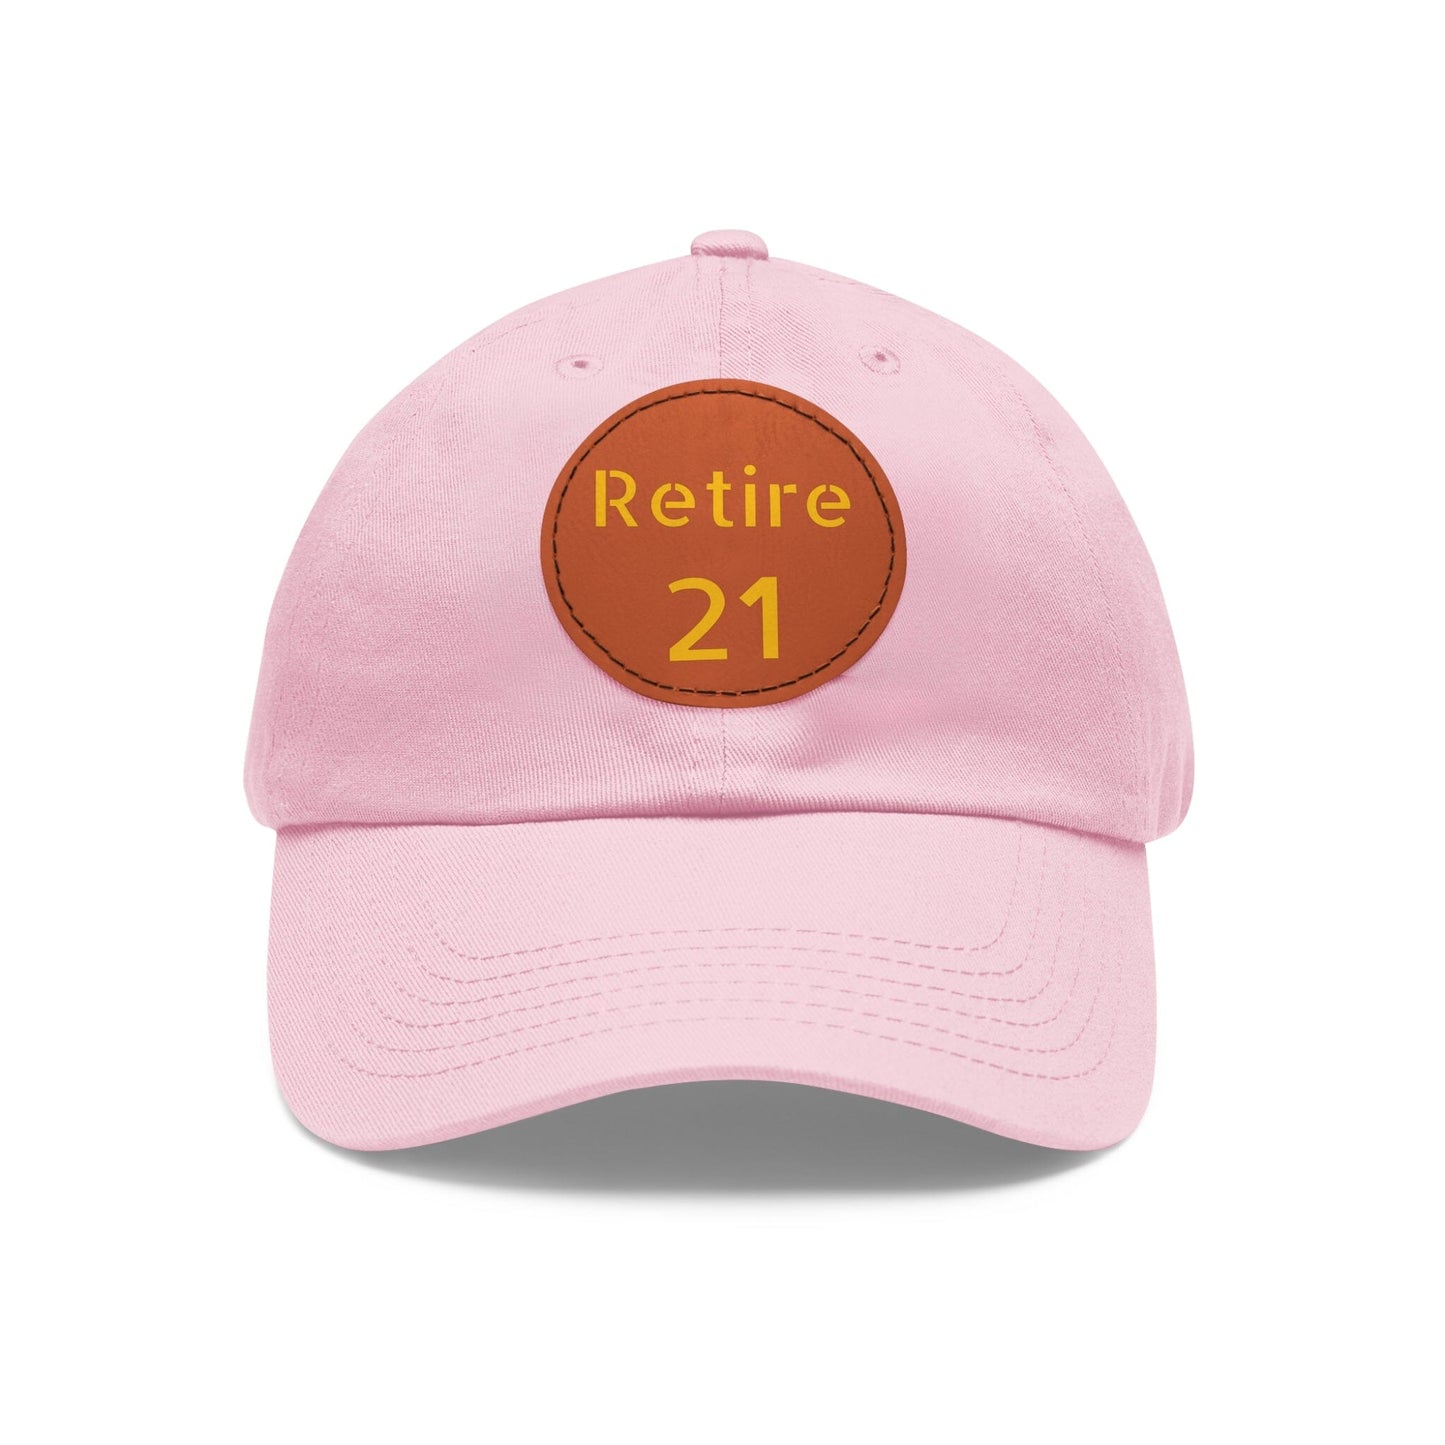 Retire 21 Hat With Leather Patch Hats Yinzergear Light Pink / Light Brown patch Circle One size